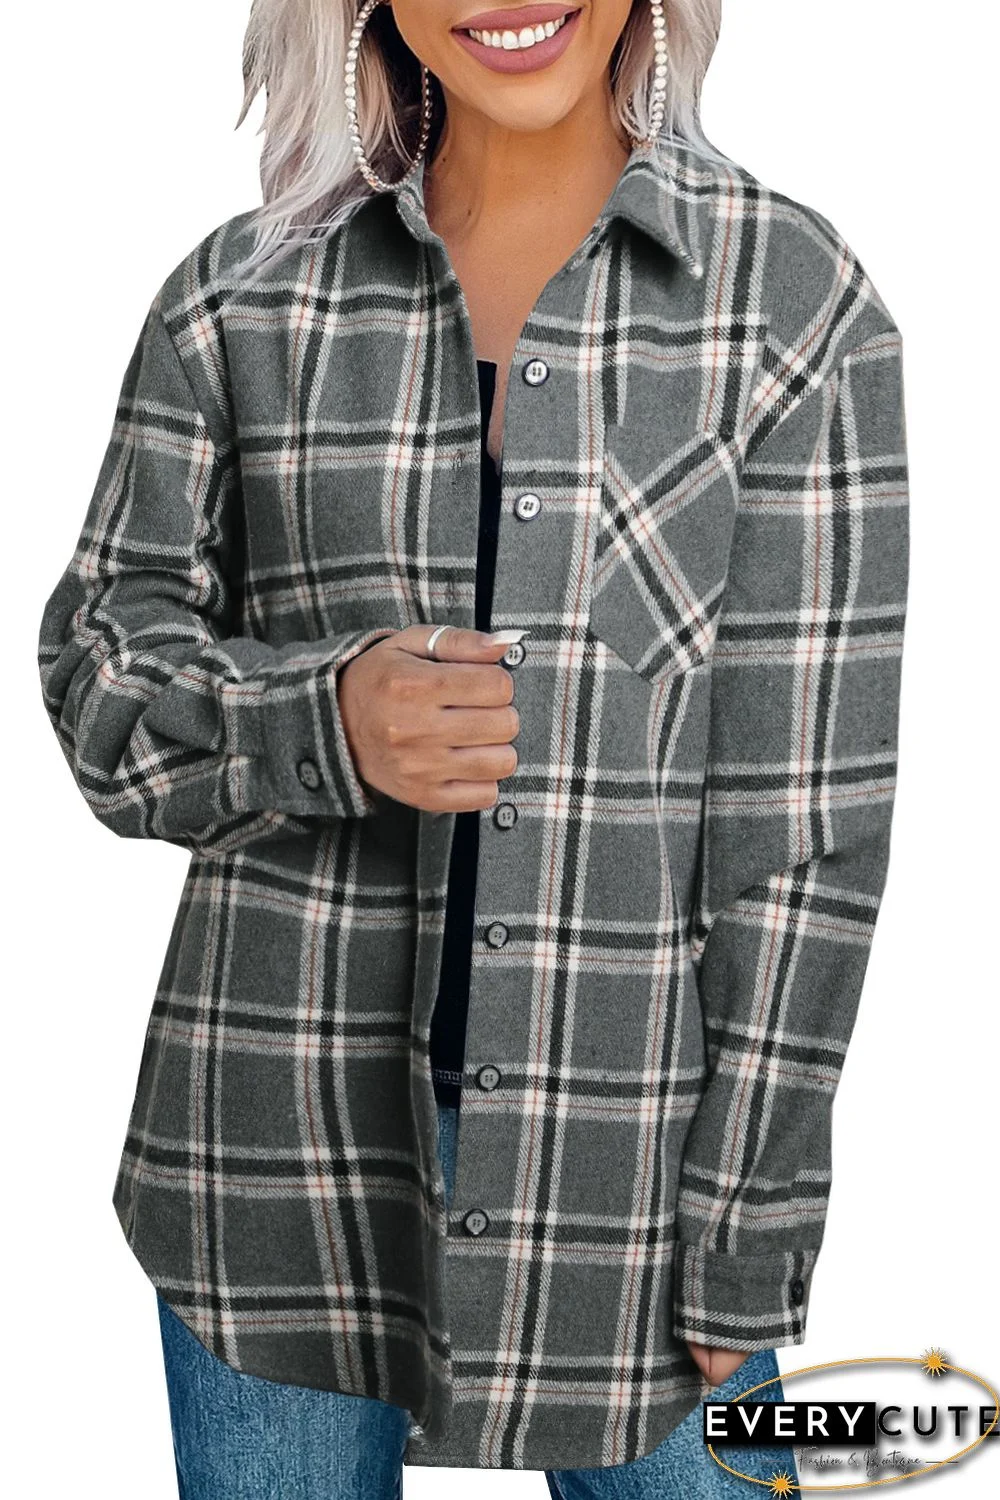 Gray Plaid Button Up Long Sleeve Shirt with Pocket